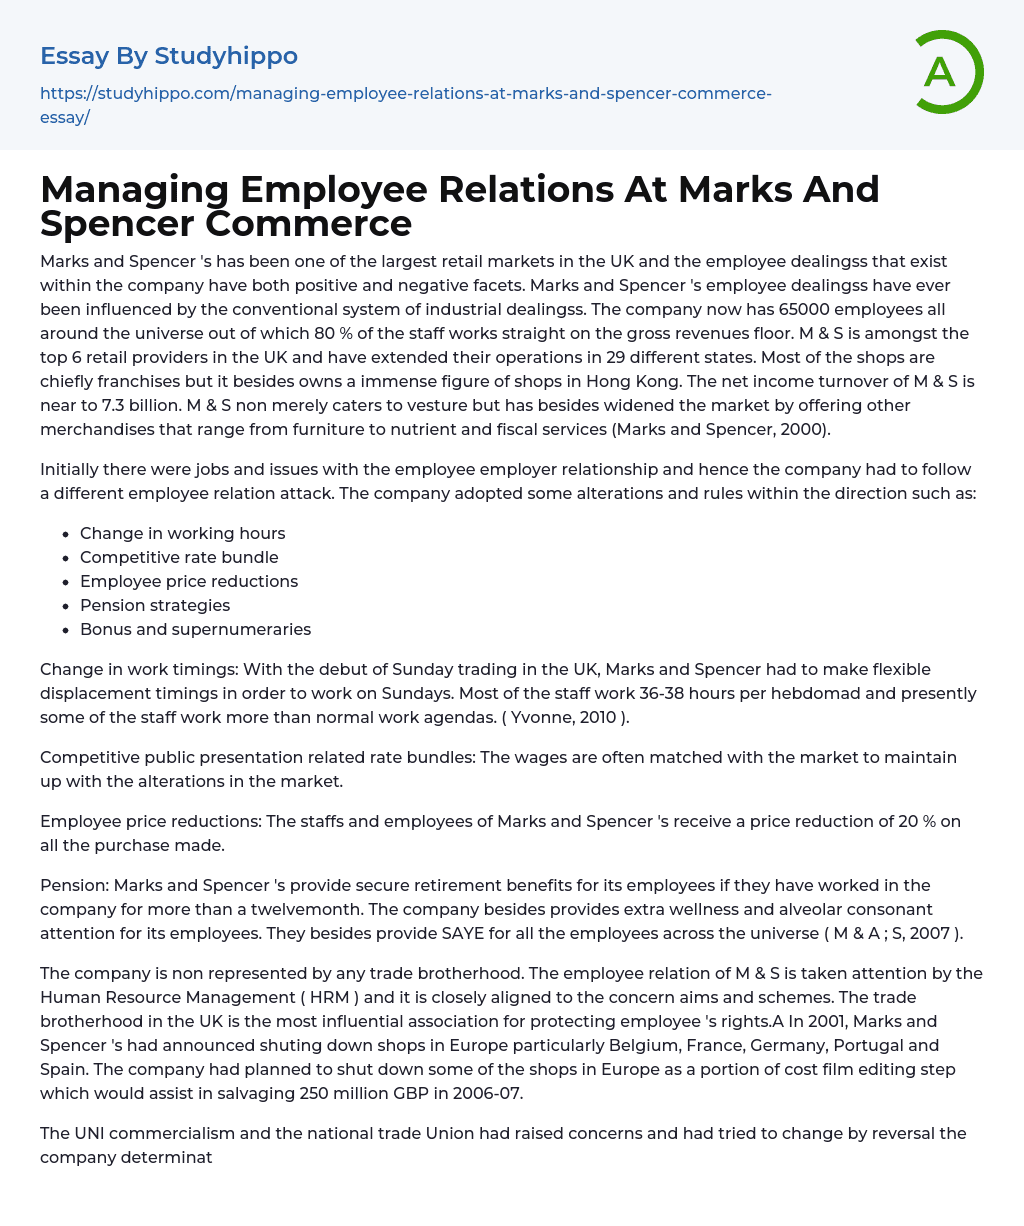 Managing Employee Relations At Marks And Spencer Commerce Essay Example